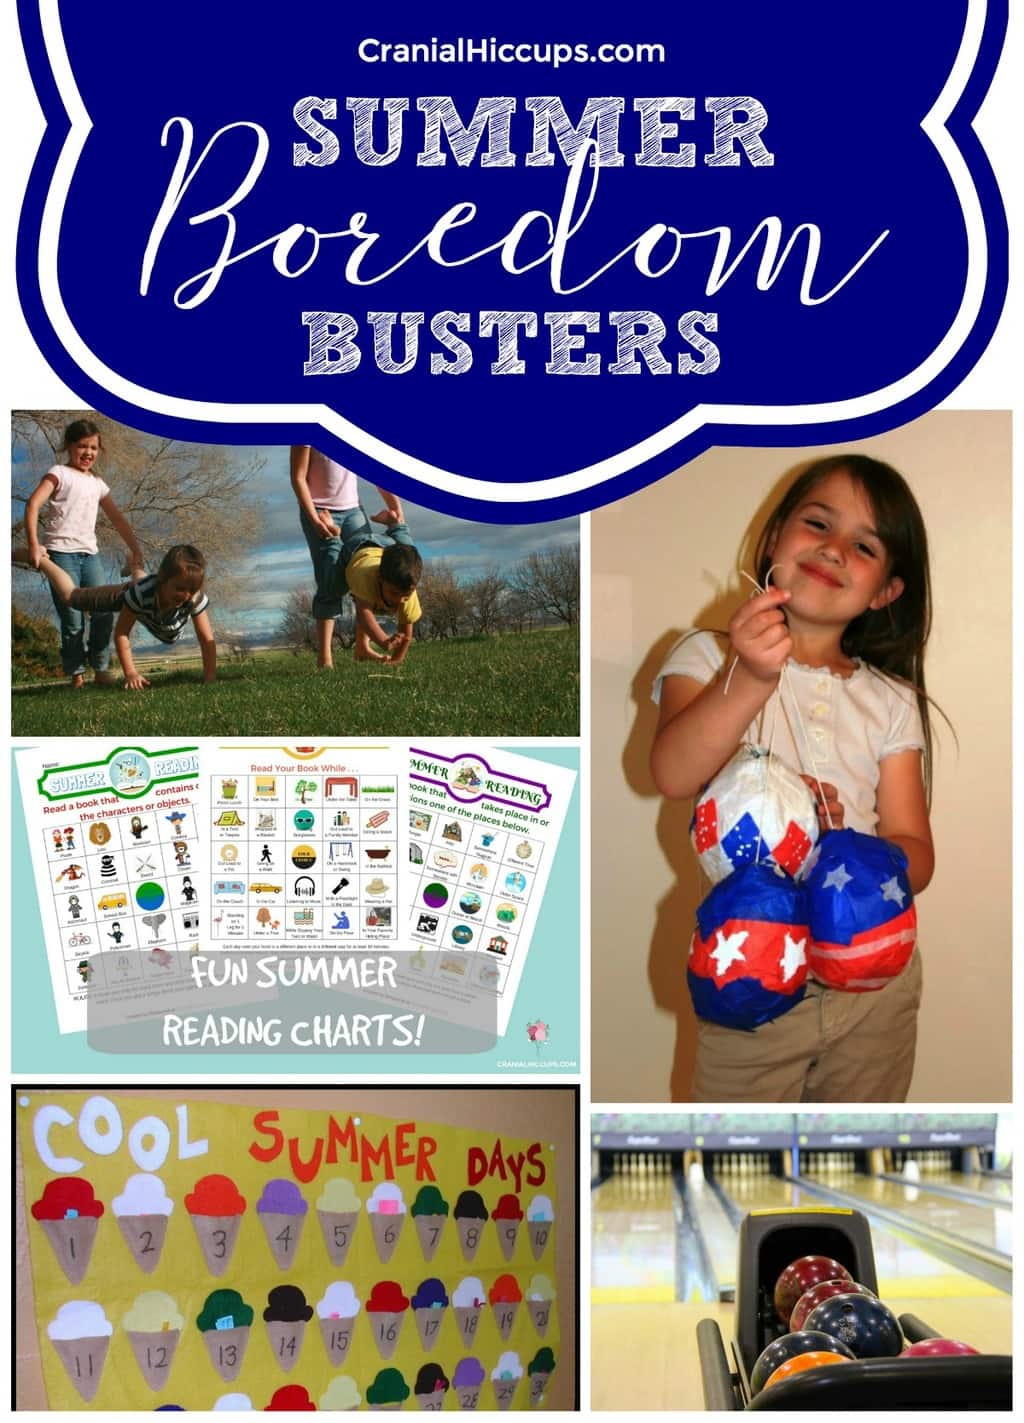 Summer Boredom Busters – Cranial Hiccups1024 x 1423